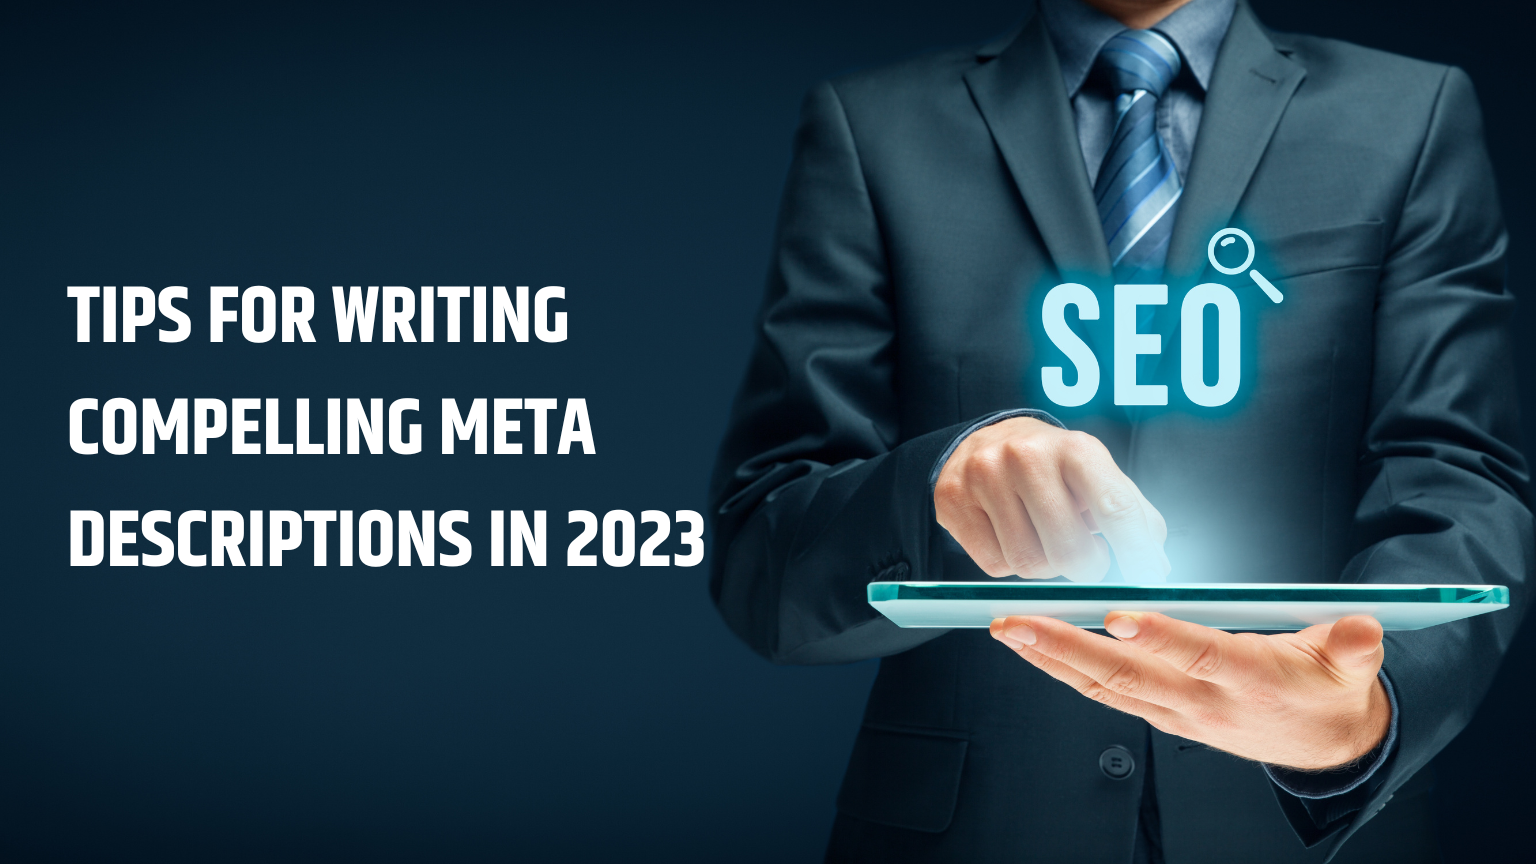 Tips for Writing Compelling Meta Descriptions In 2023